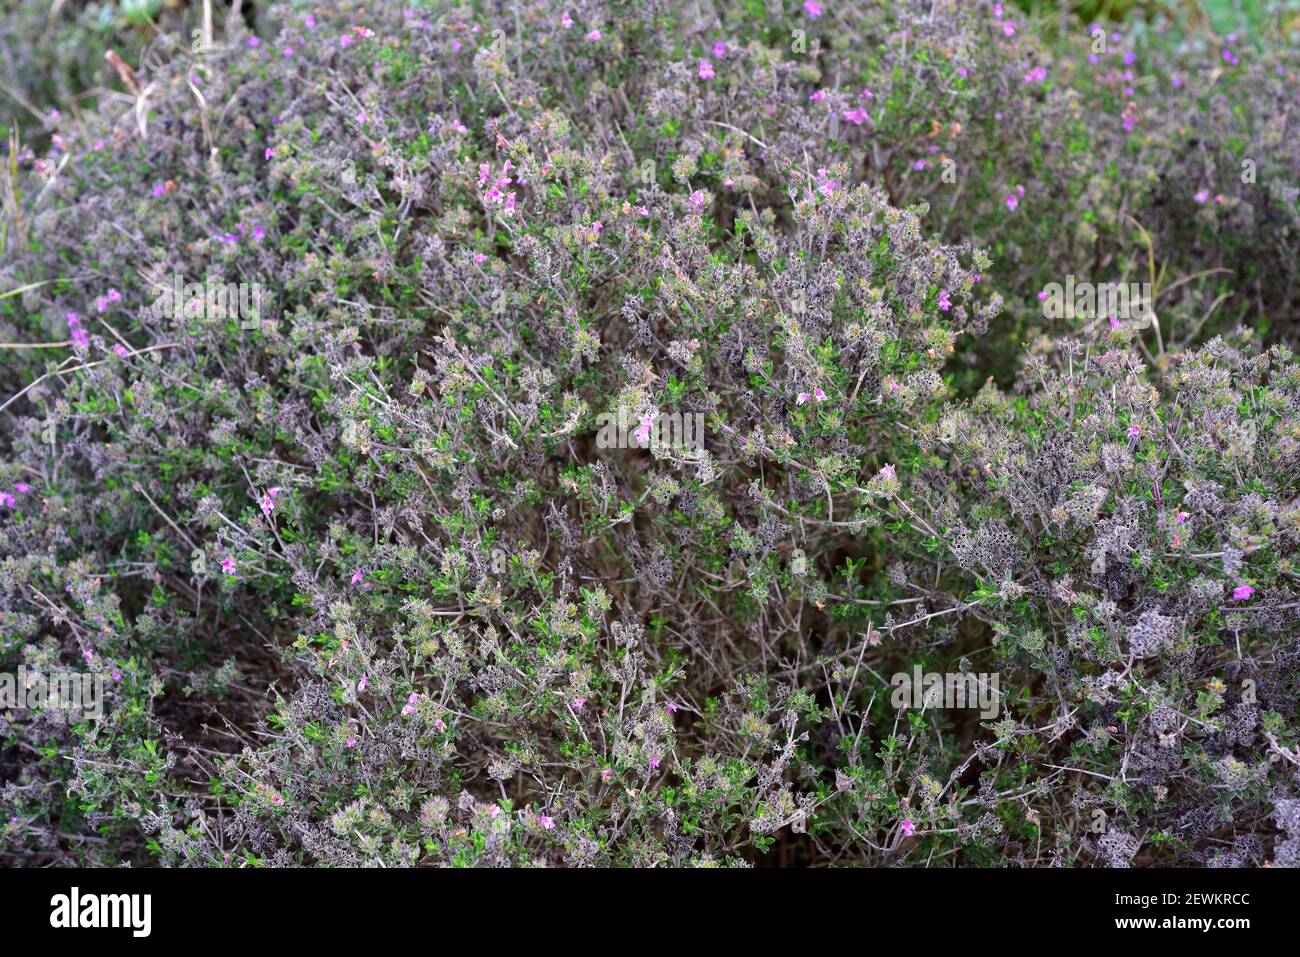 Pink savory or thyme-leaved savory (Satureja thymbra) is an aromatic shrub native to eastern Mediterranean basin. Stock Photo